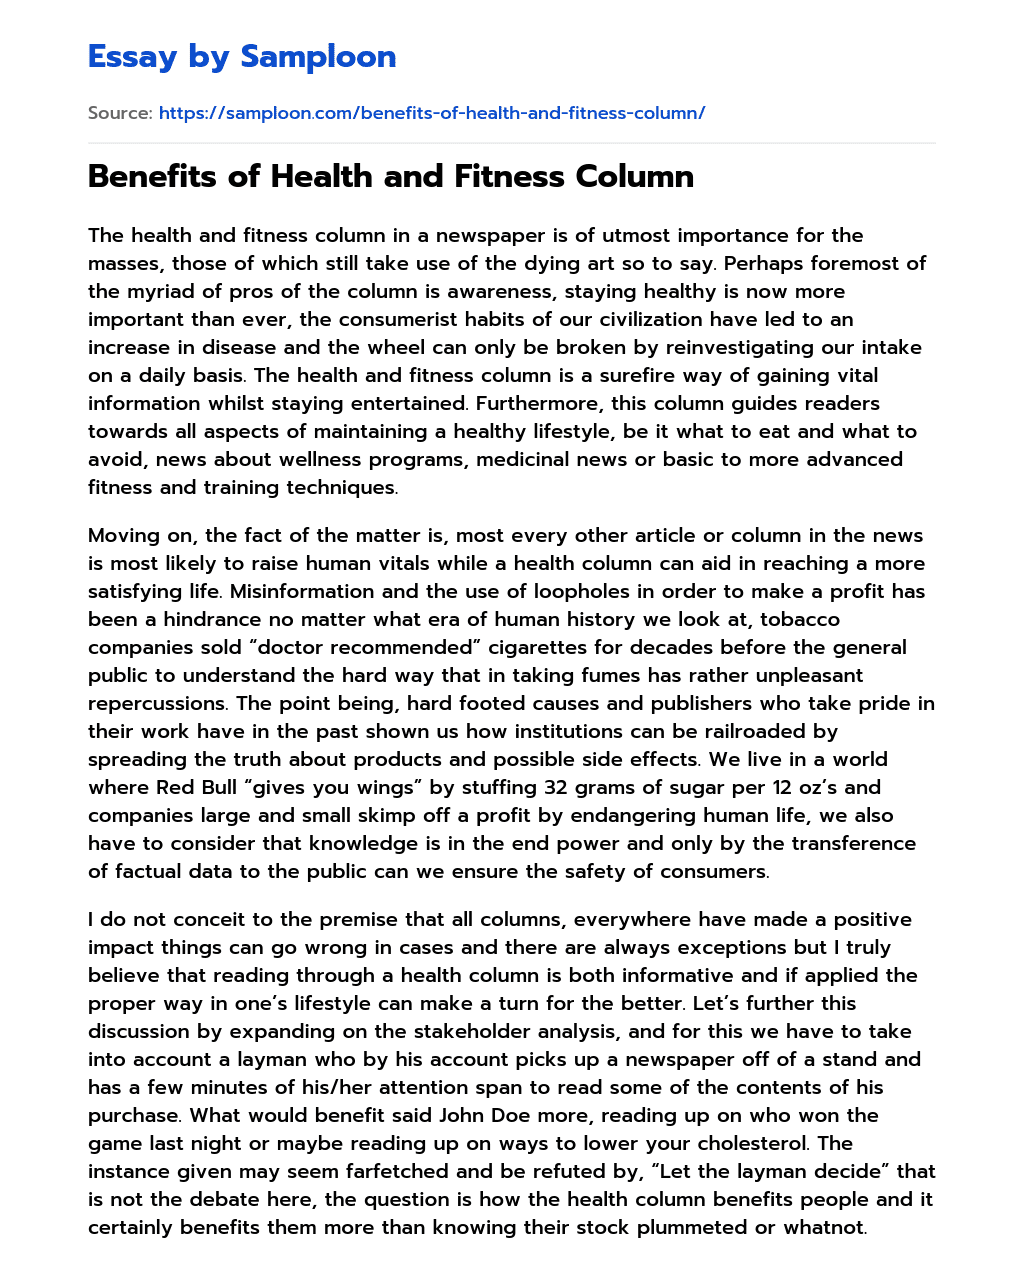 Benefits of Health and Fitness Column essay